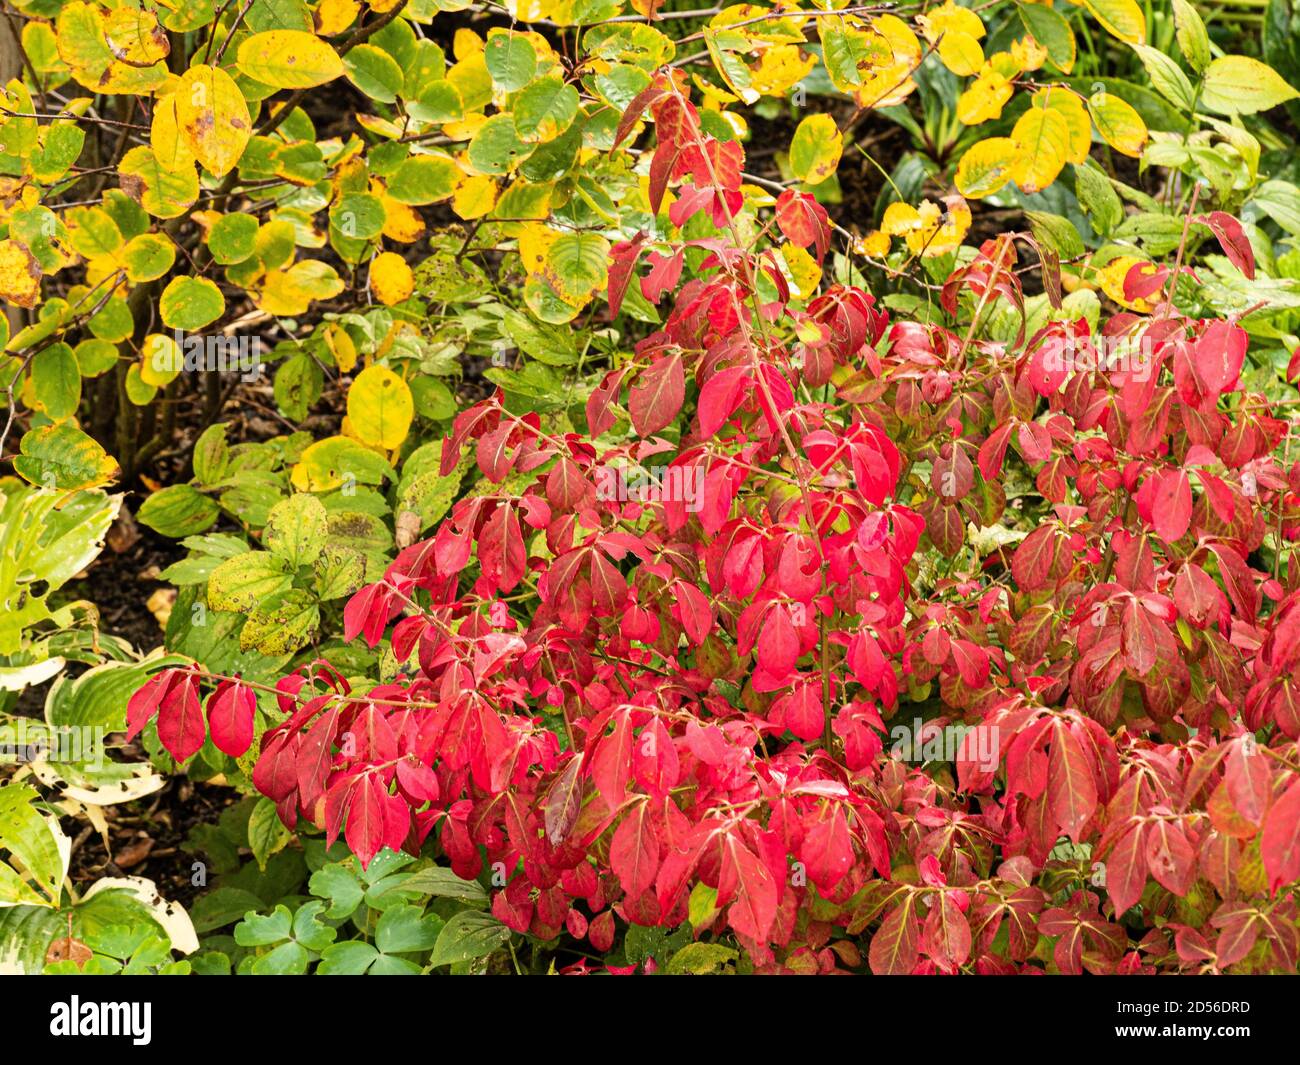 The fiery red foliage of Euonymus alatus 'Compactus against the yellow leaves of an Amelanchier Stock Photo